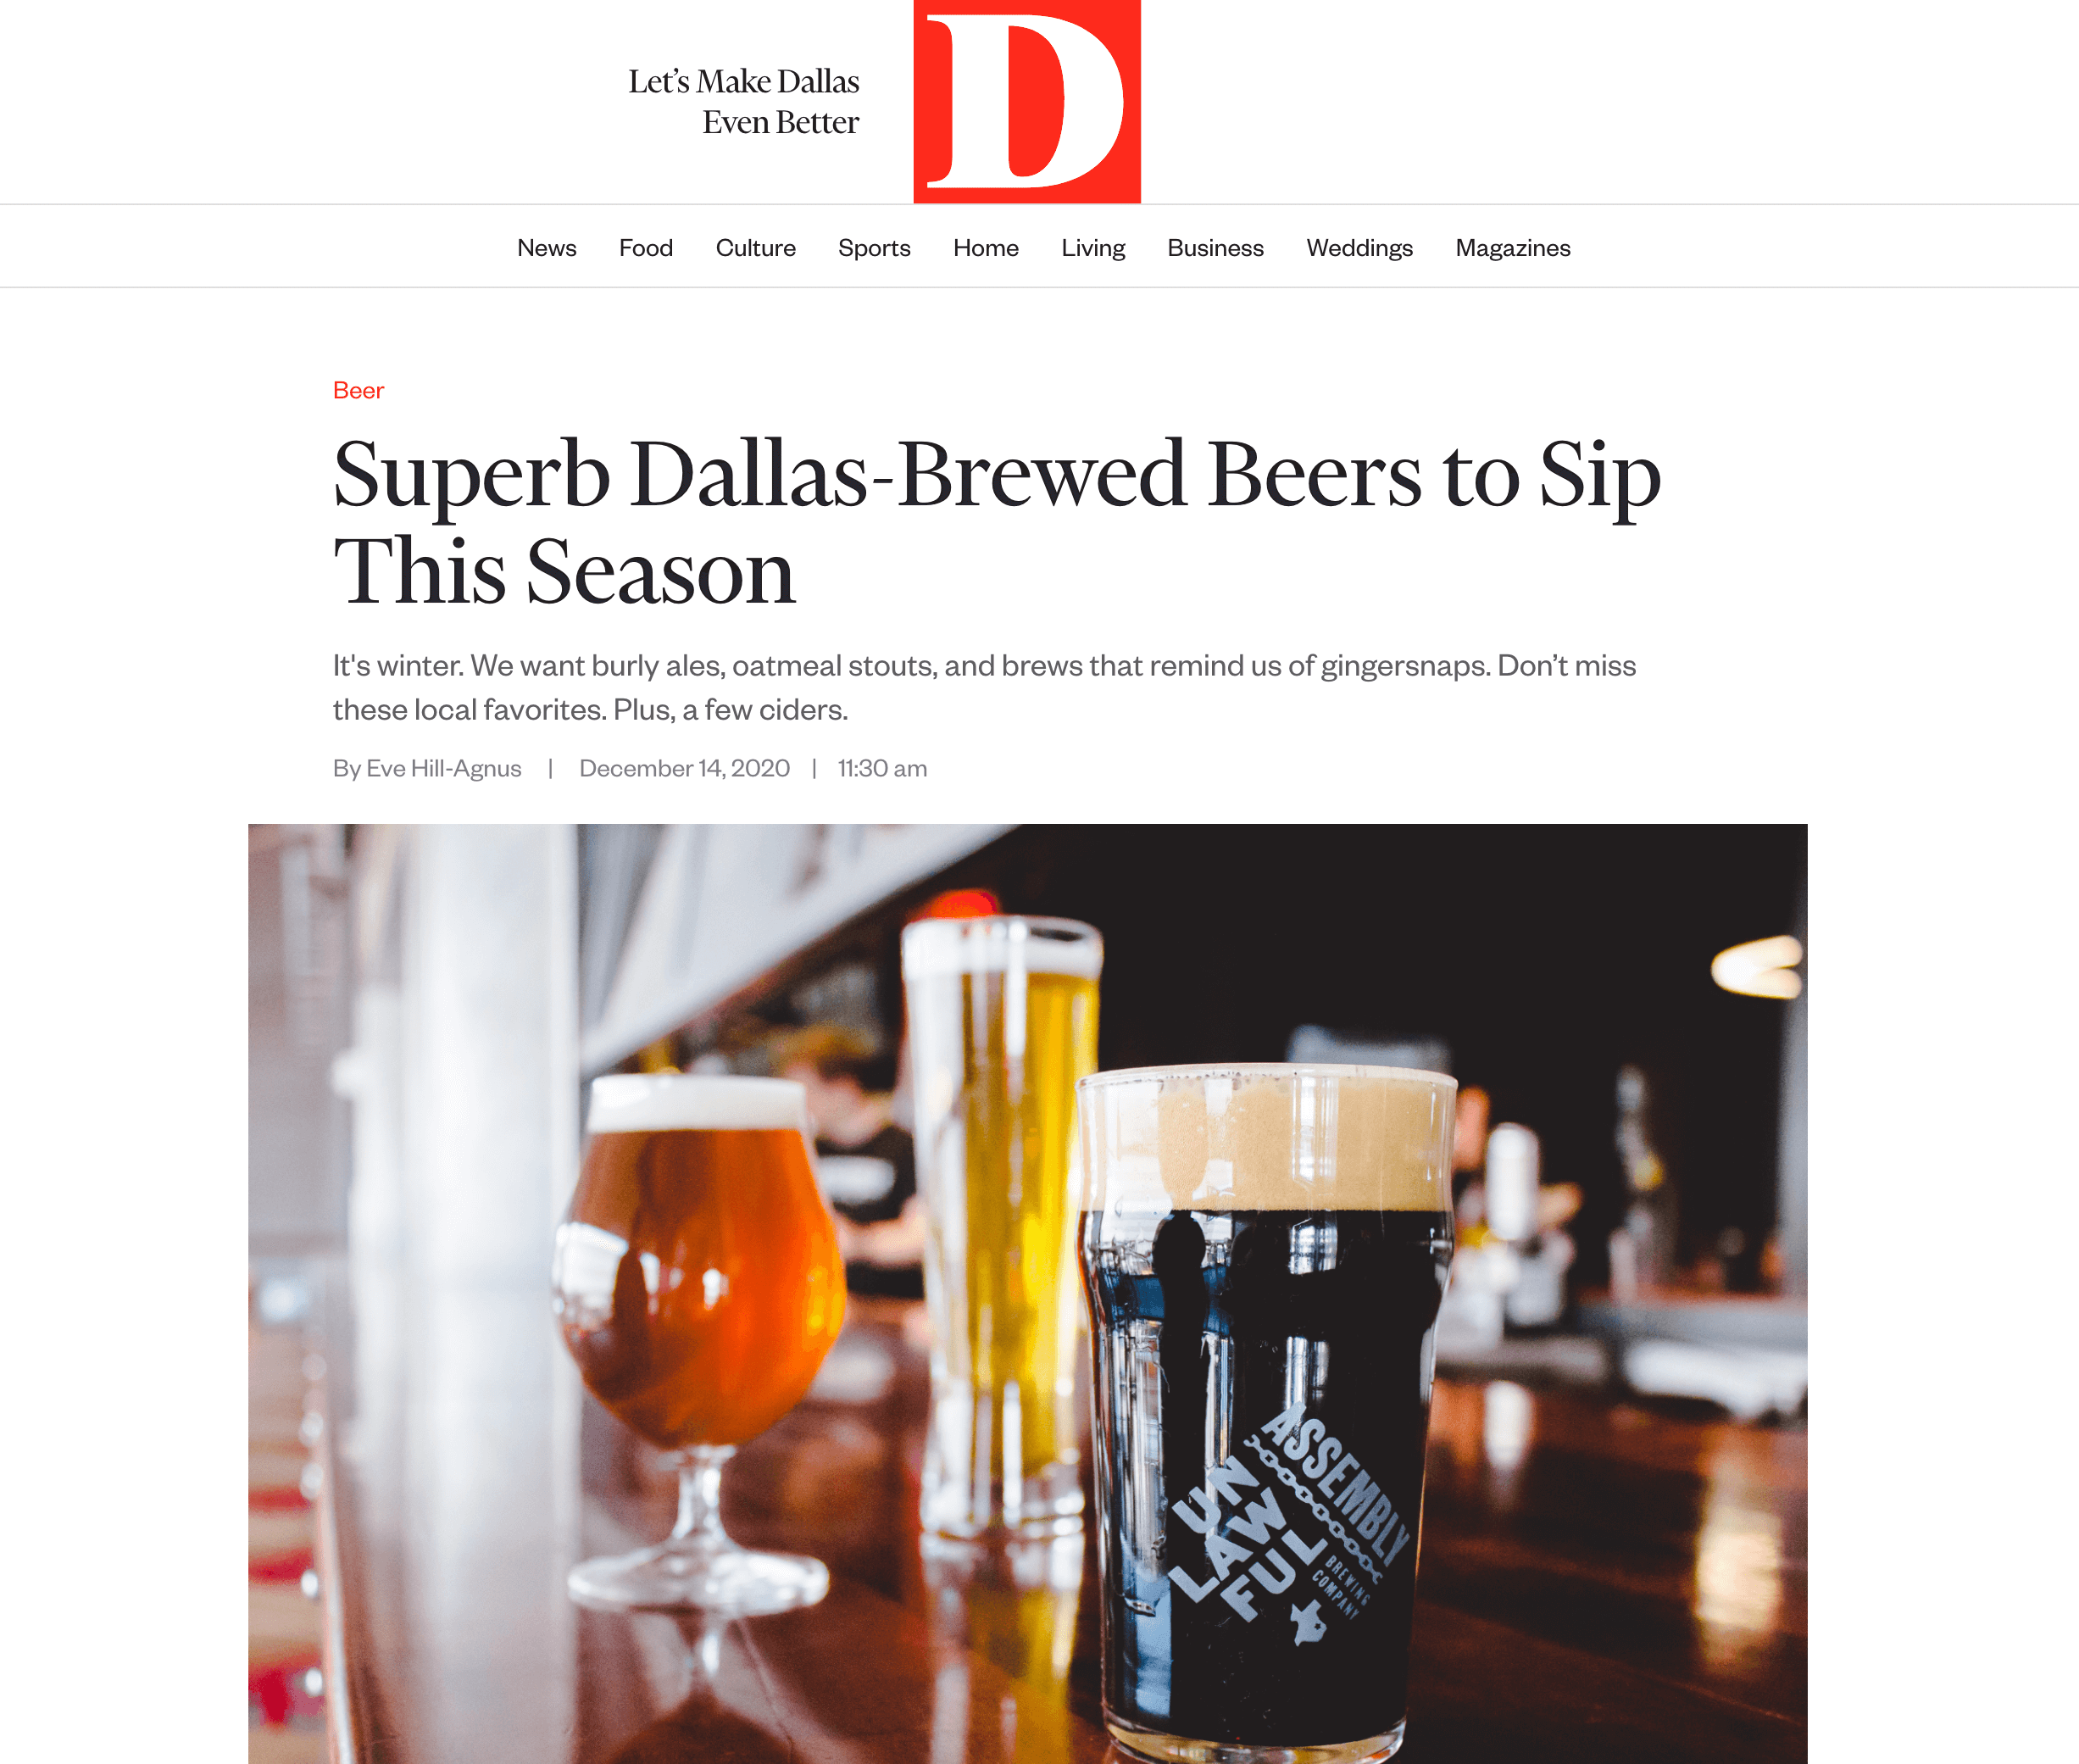 Superb Dallas Brewed Beers to Sip This Season in D Magazine